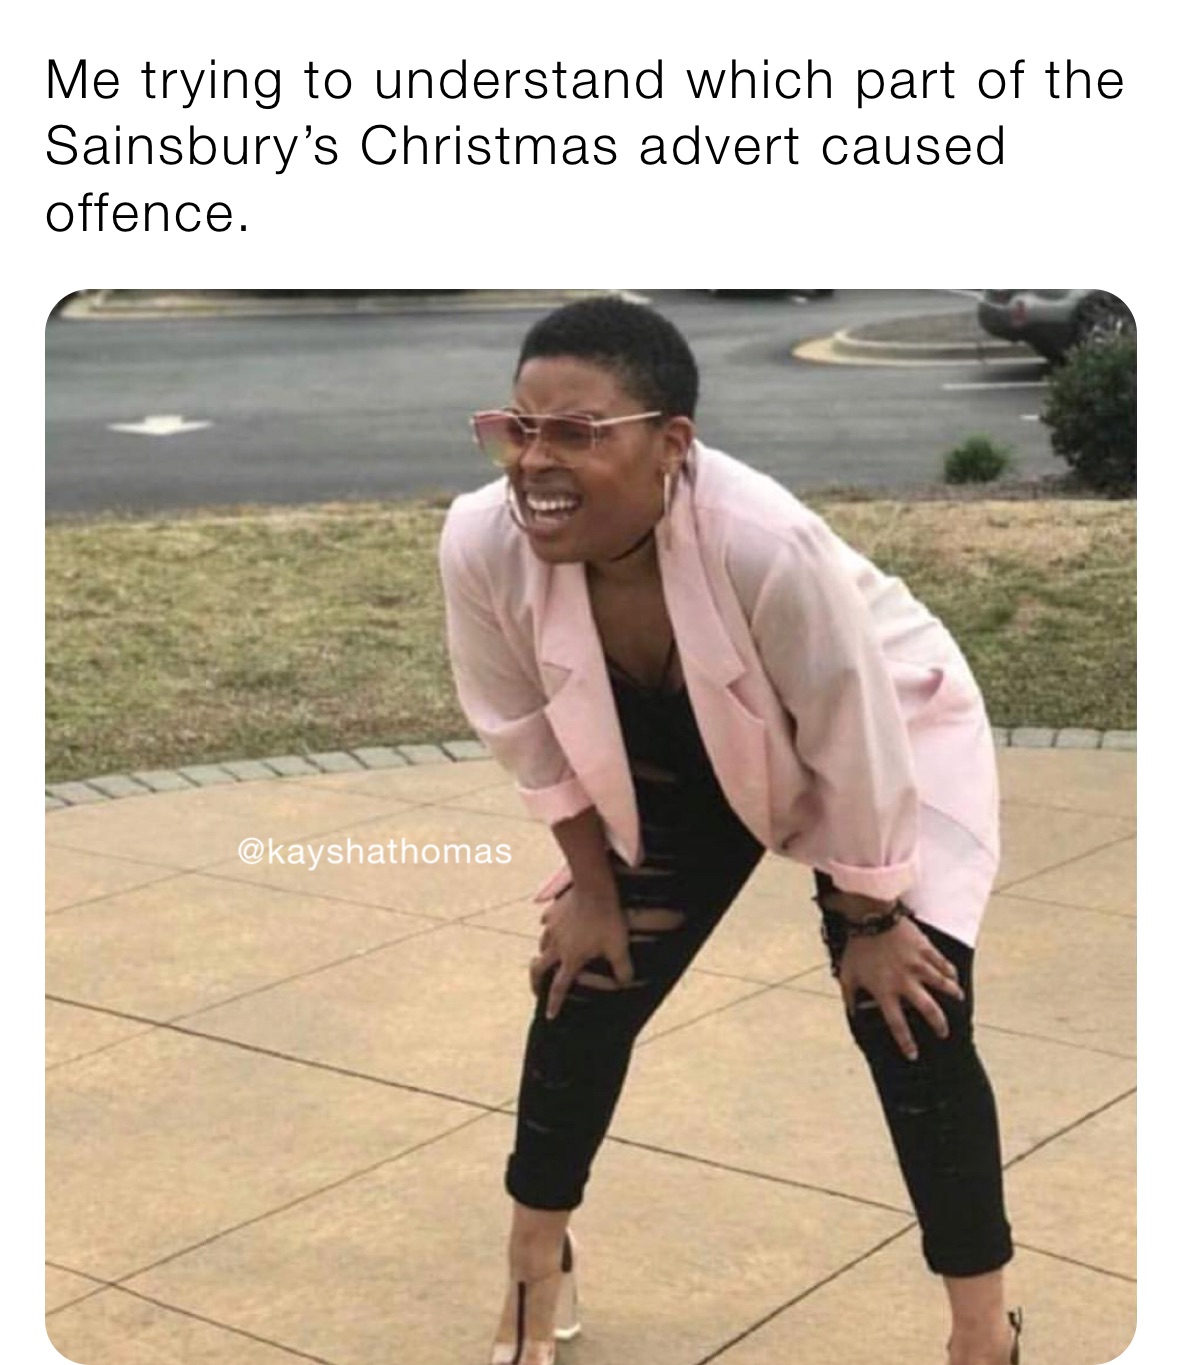 Me trying to understand which part of the Sainsbury’s Christmas advert caused offence.